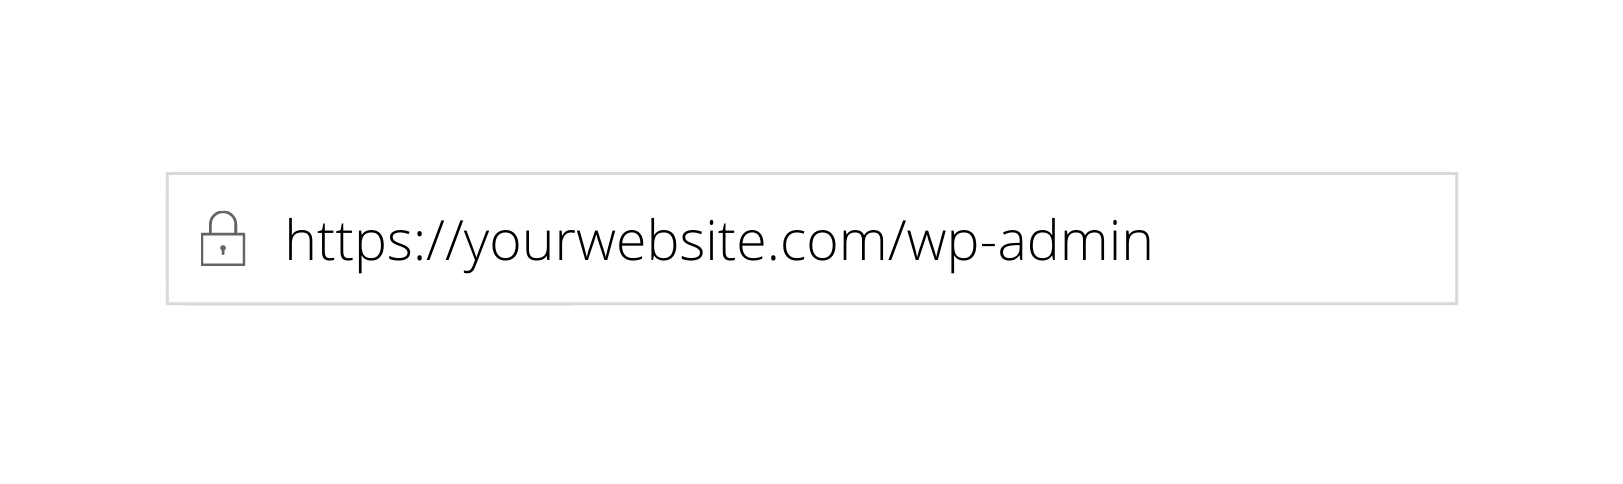 text showing a URL